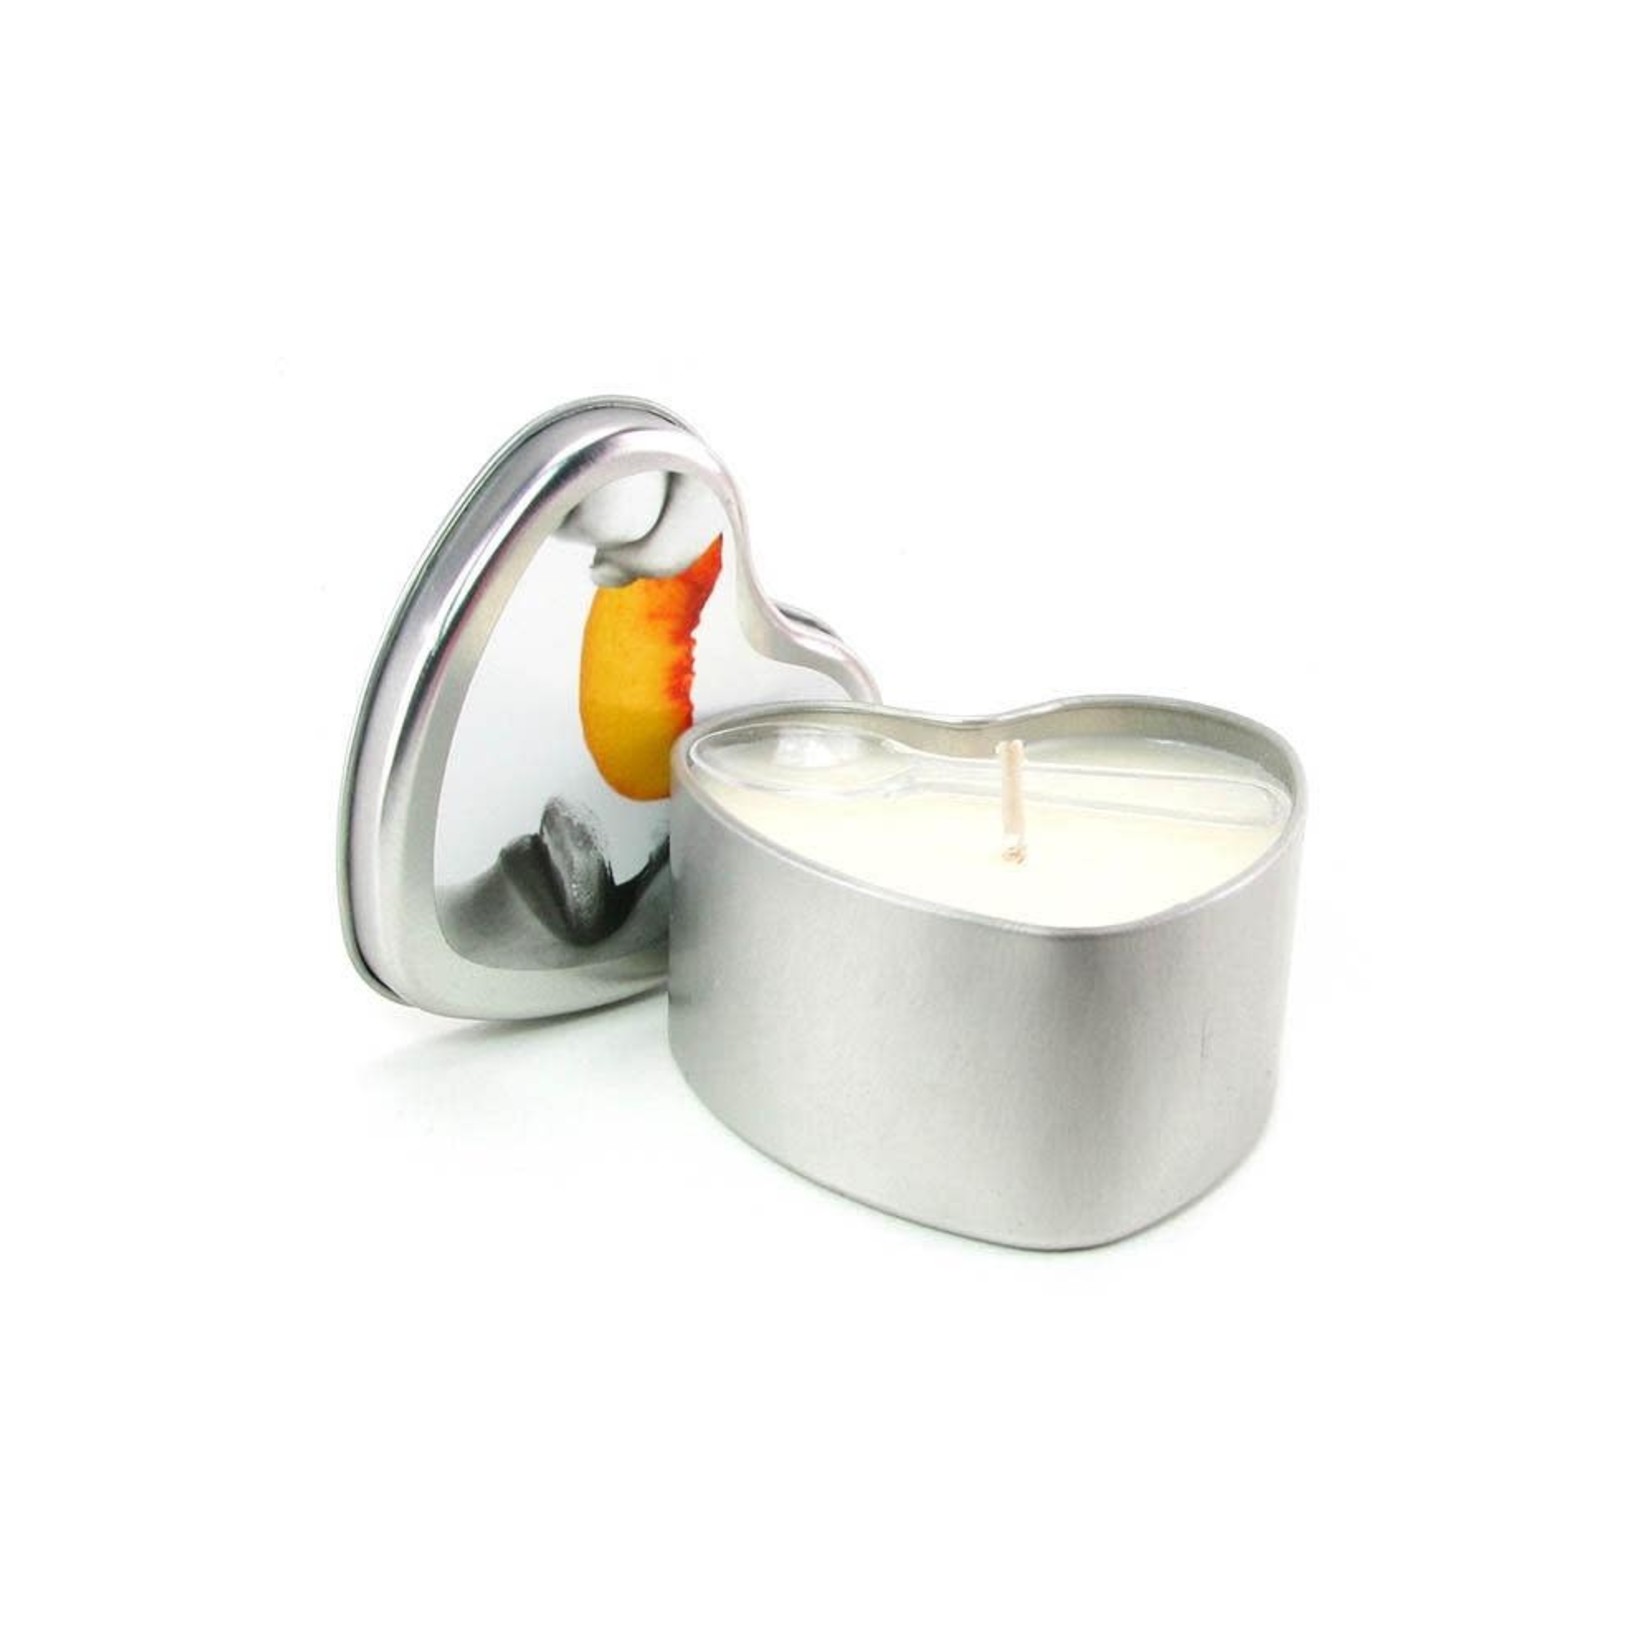 EARTHLY BODY EARTHLY BODIES - 3-IN-1 MASSAGE OIL CANDLE - PEACH